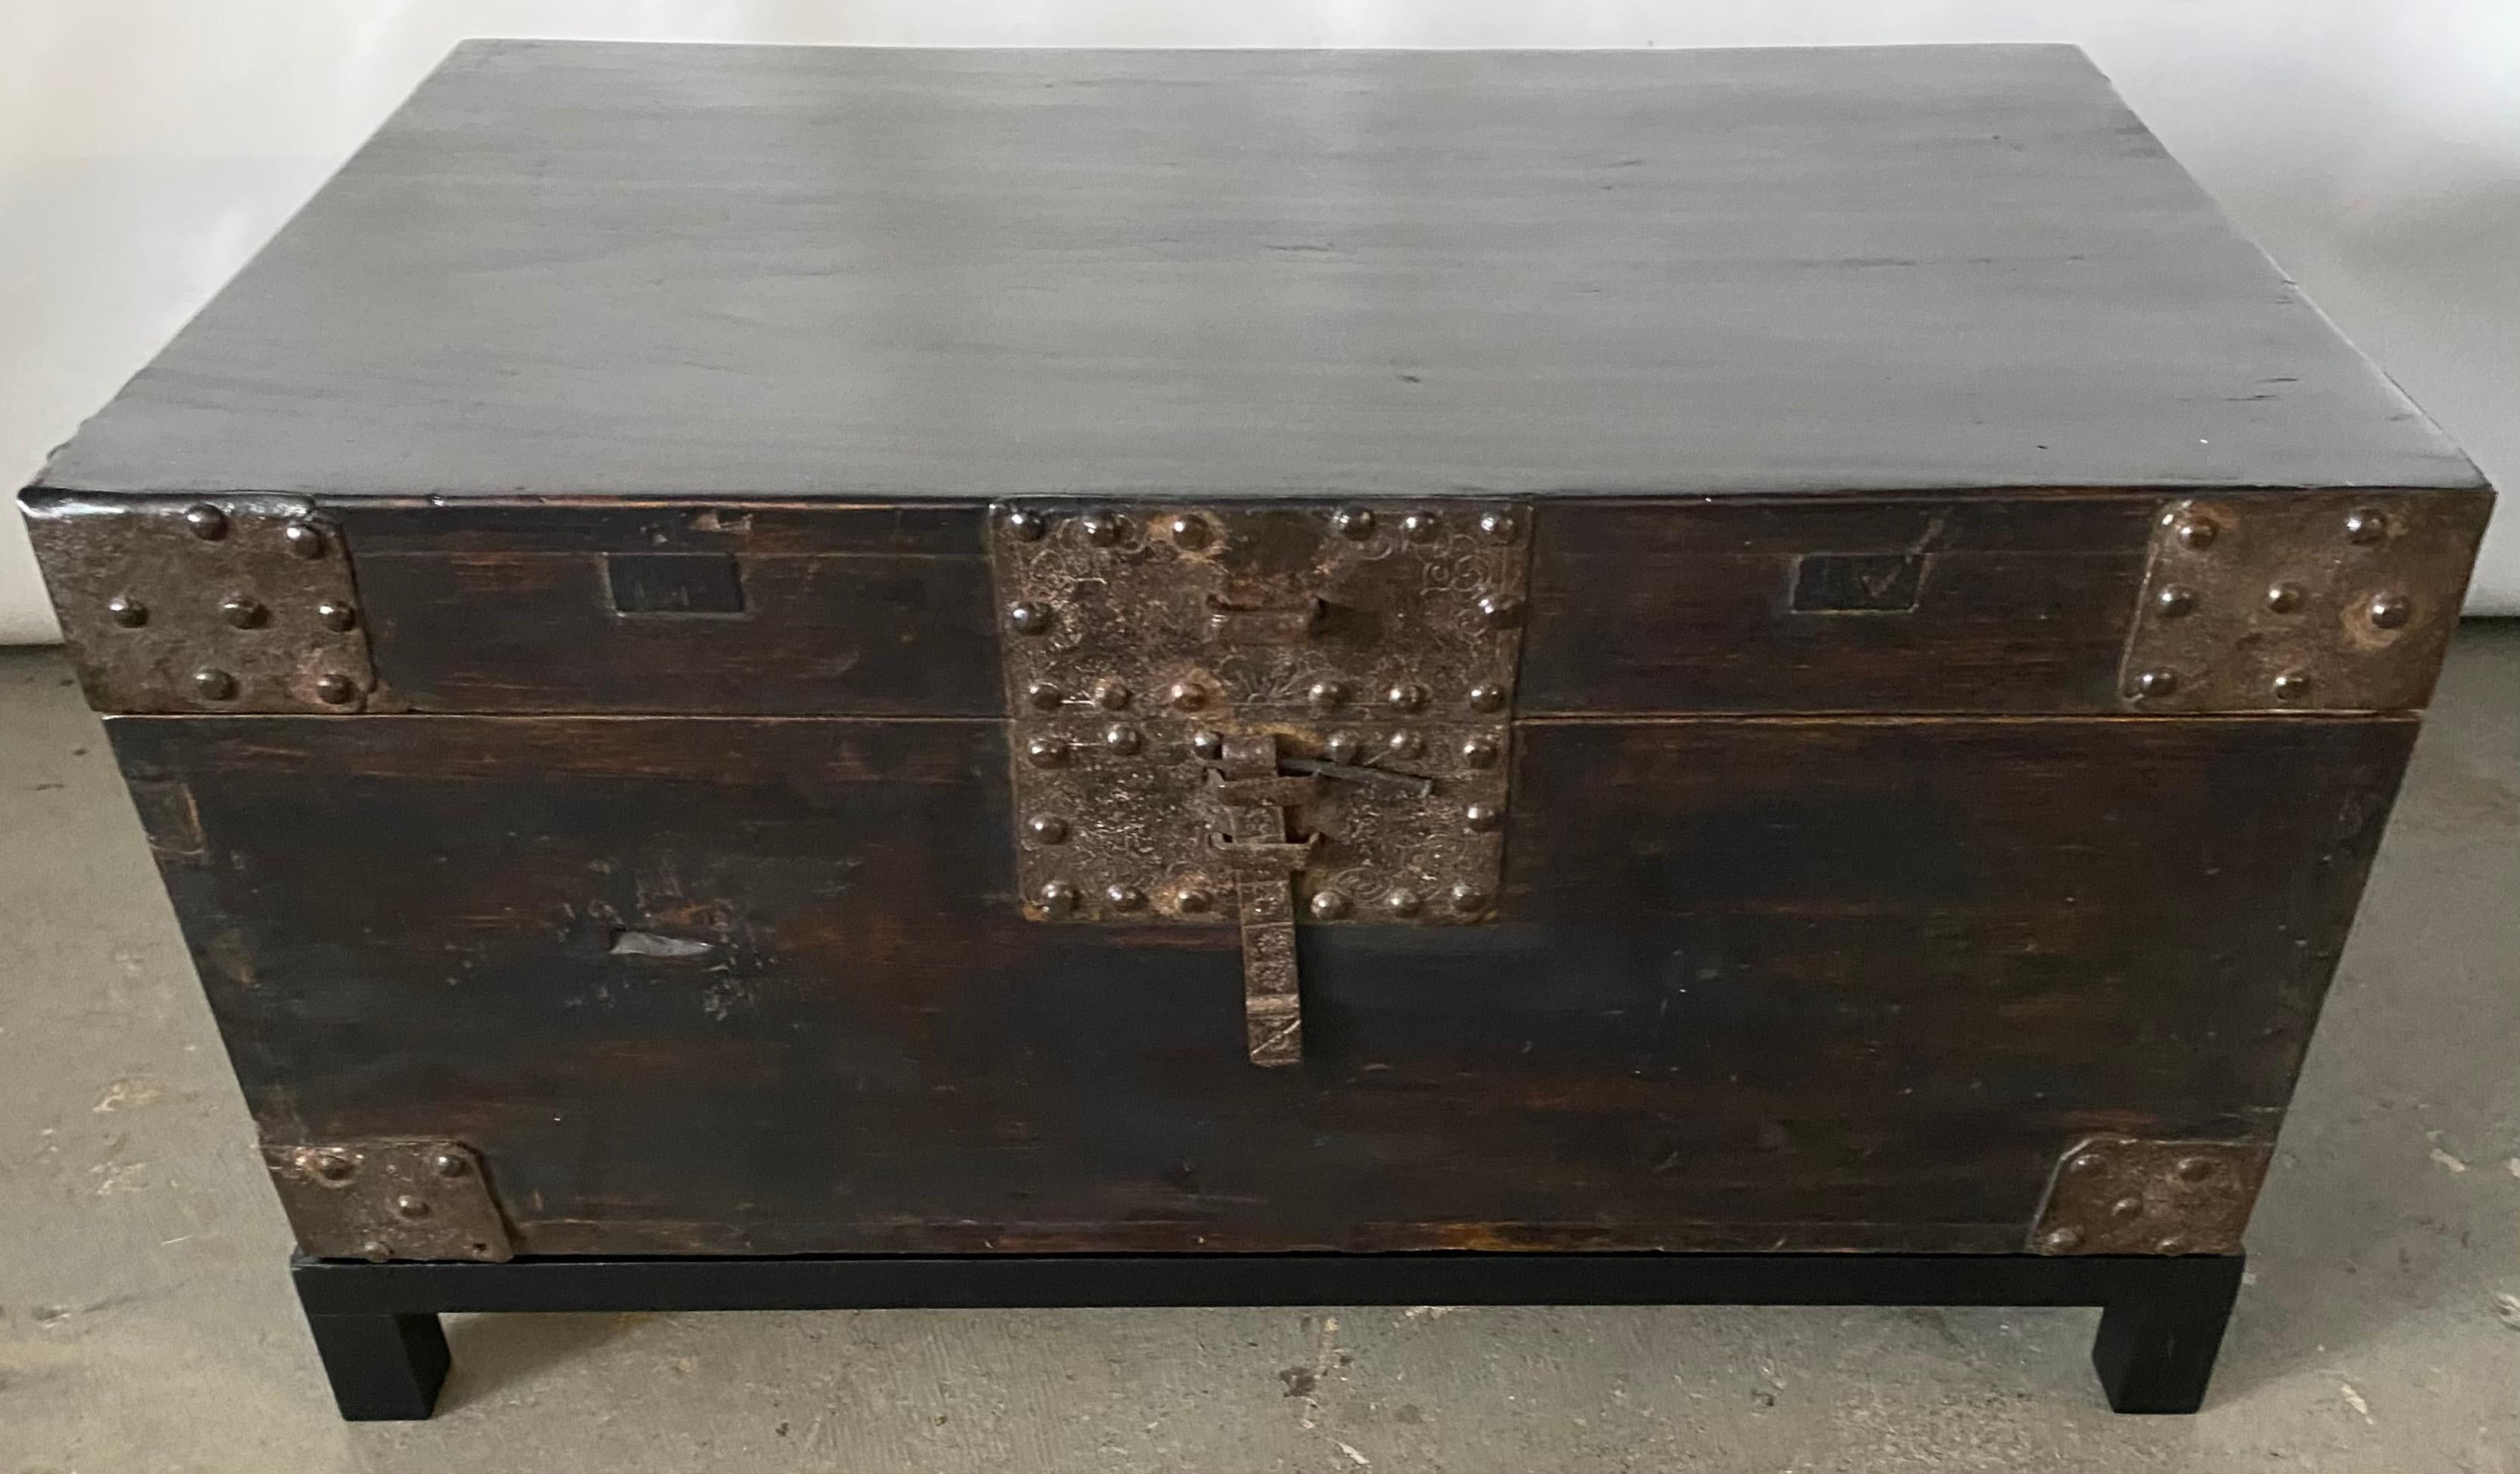 A very handsome Chinese lacquered trunk or coffee table with exceptional heavily embellished hand-hammered hardware -- iron handles, hinges, corner plates and lock which uses a cross piece or lock (not included) to secure the flat bolt. The chest is